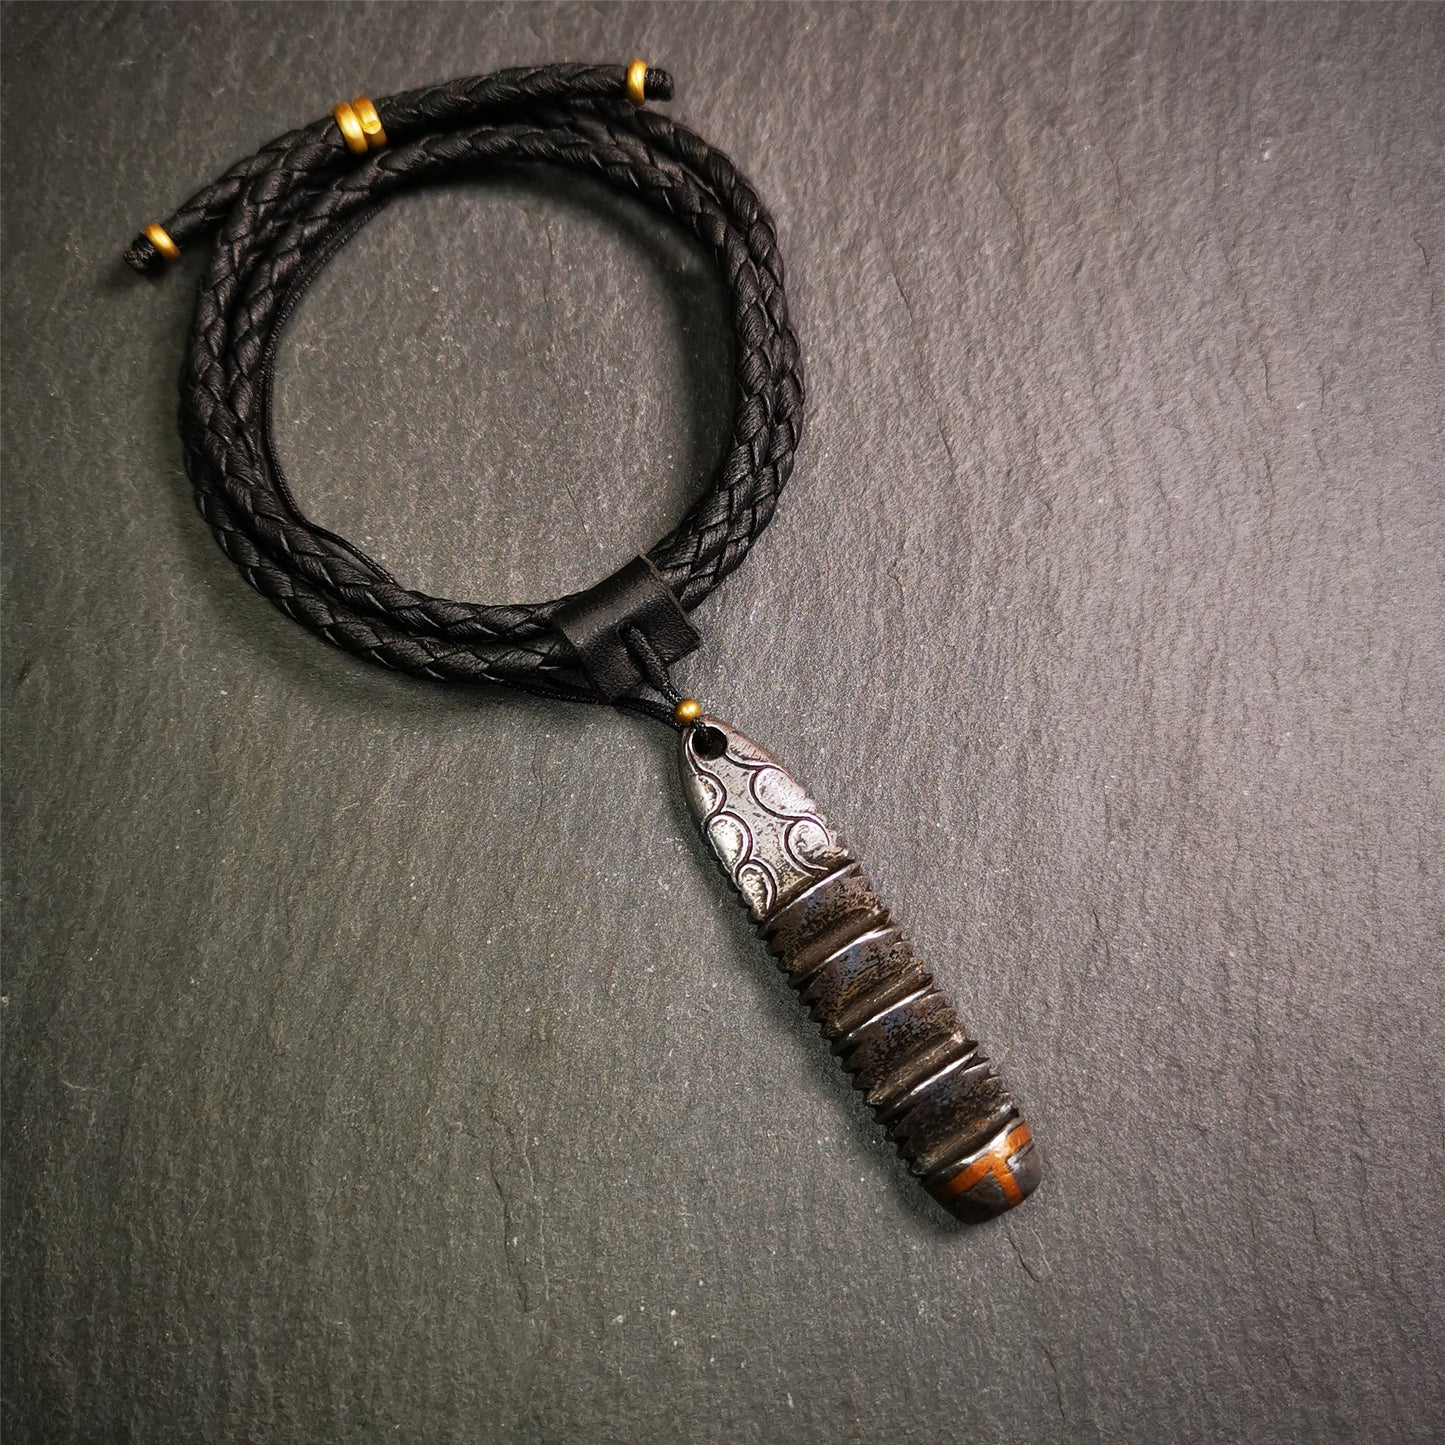 This unique Ladder pendant is made by Tibetan craftsmen in Hepo Township, Baiyu County. It is made of cold iron and copper, black color,the shape is Tibetan Ladder of Heaven,length is 60mm. You can make it into a pendant,keychain, or just put it on your desk,as an ornament.